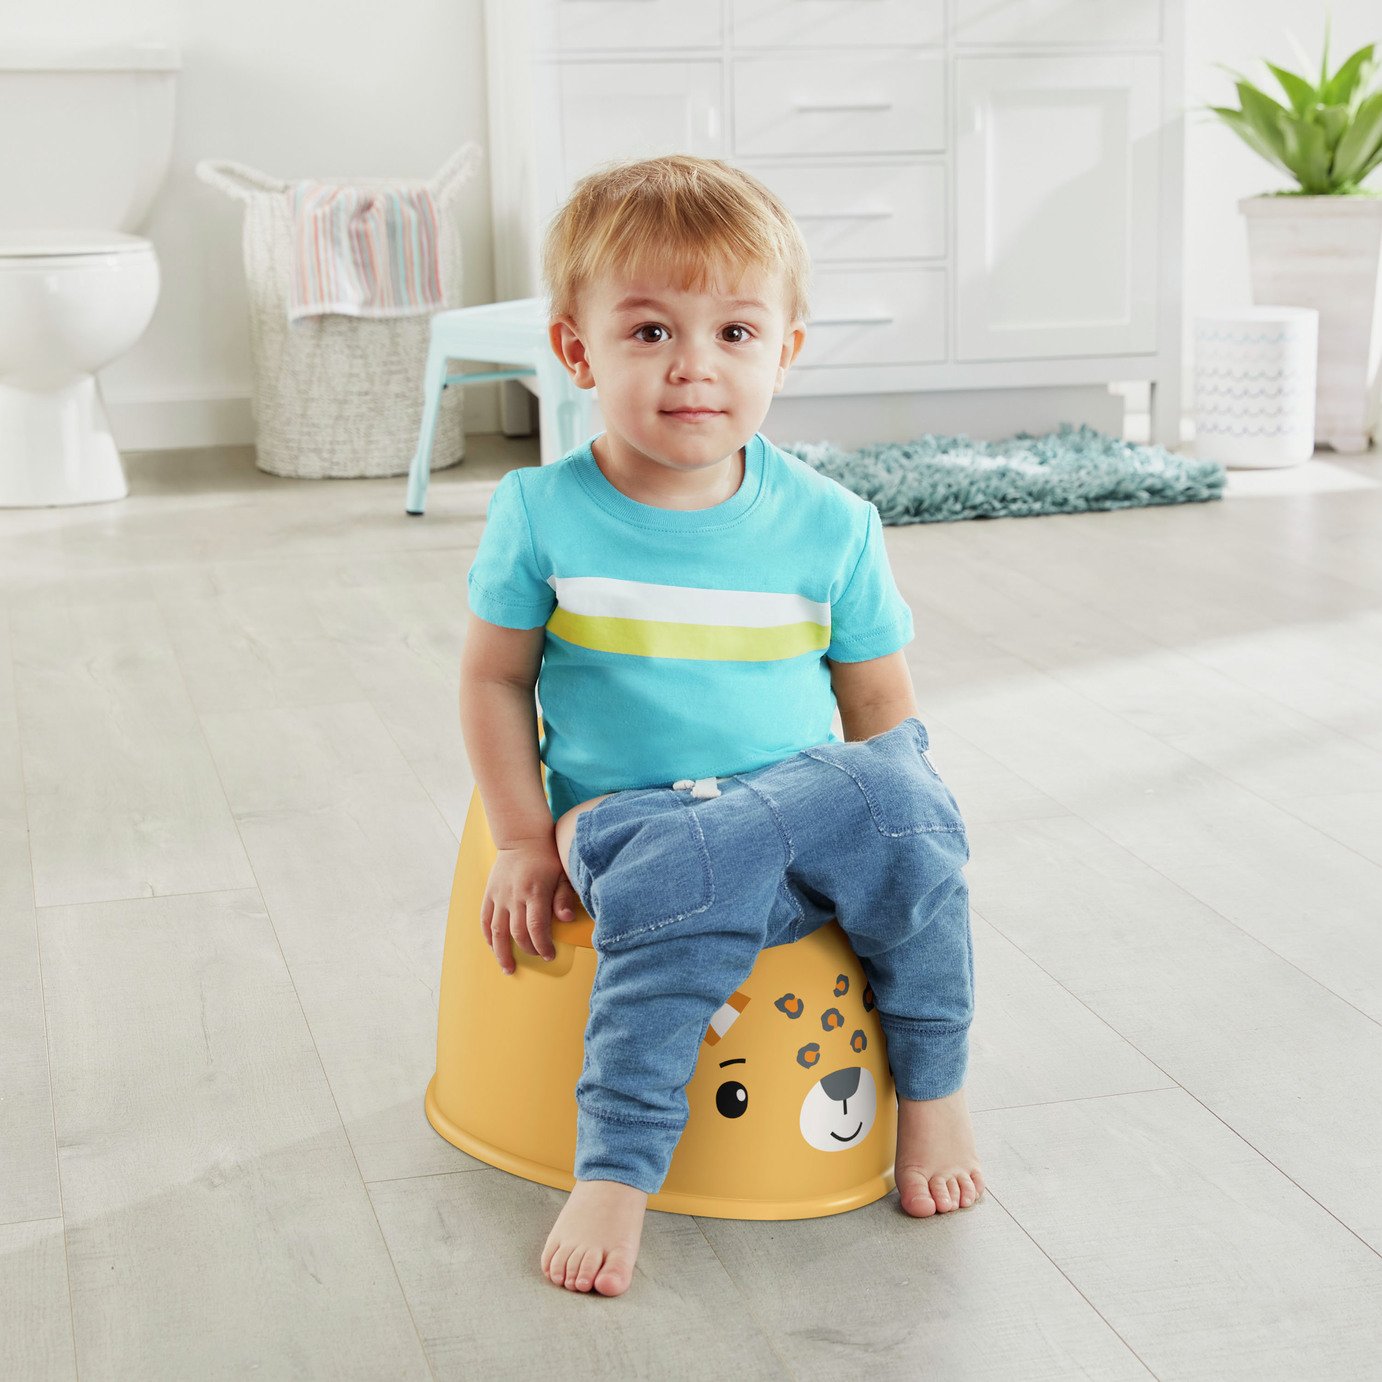 Fisher-Price Leopard Potty Toddler Training Seat